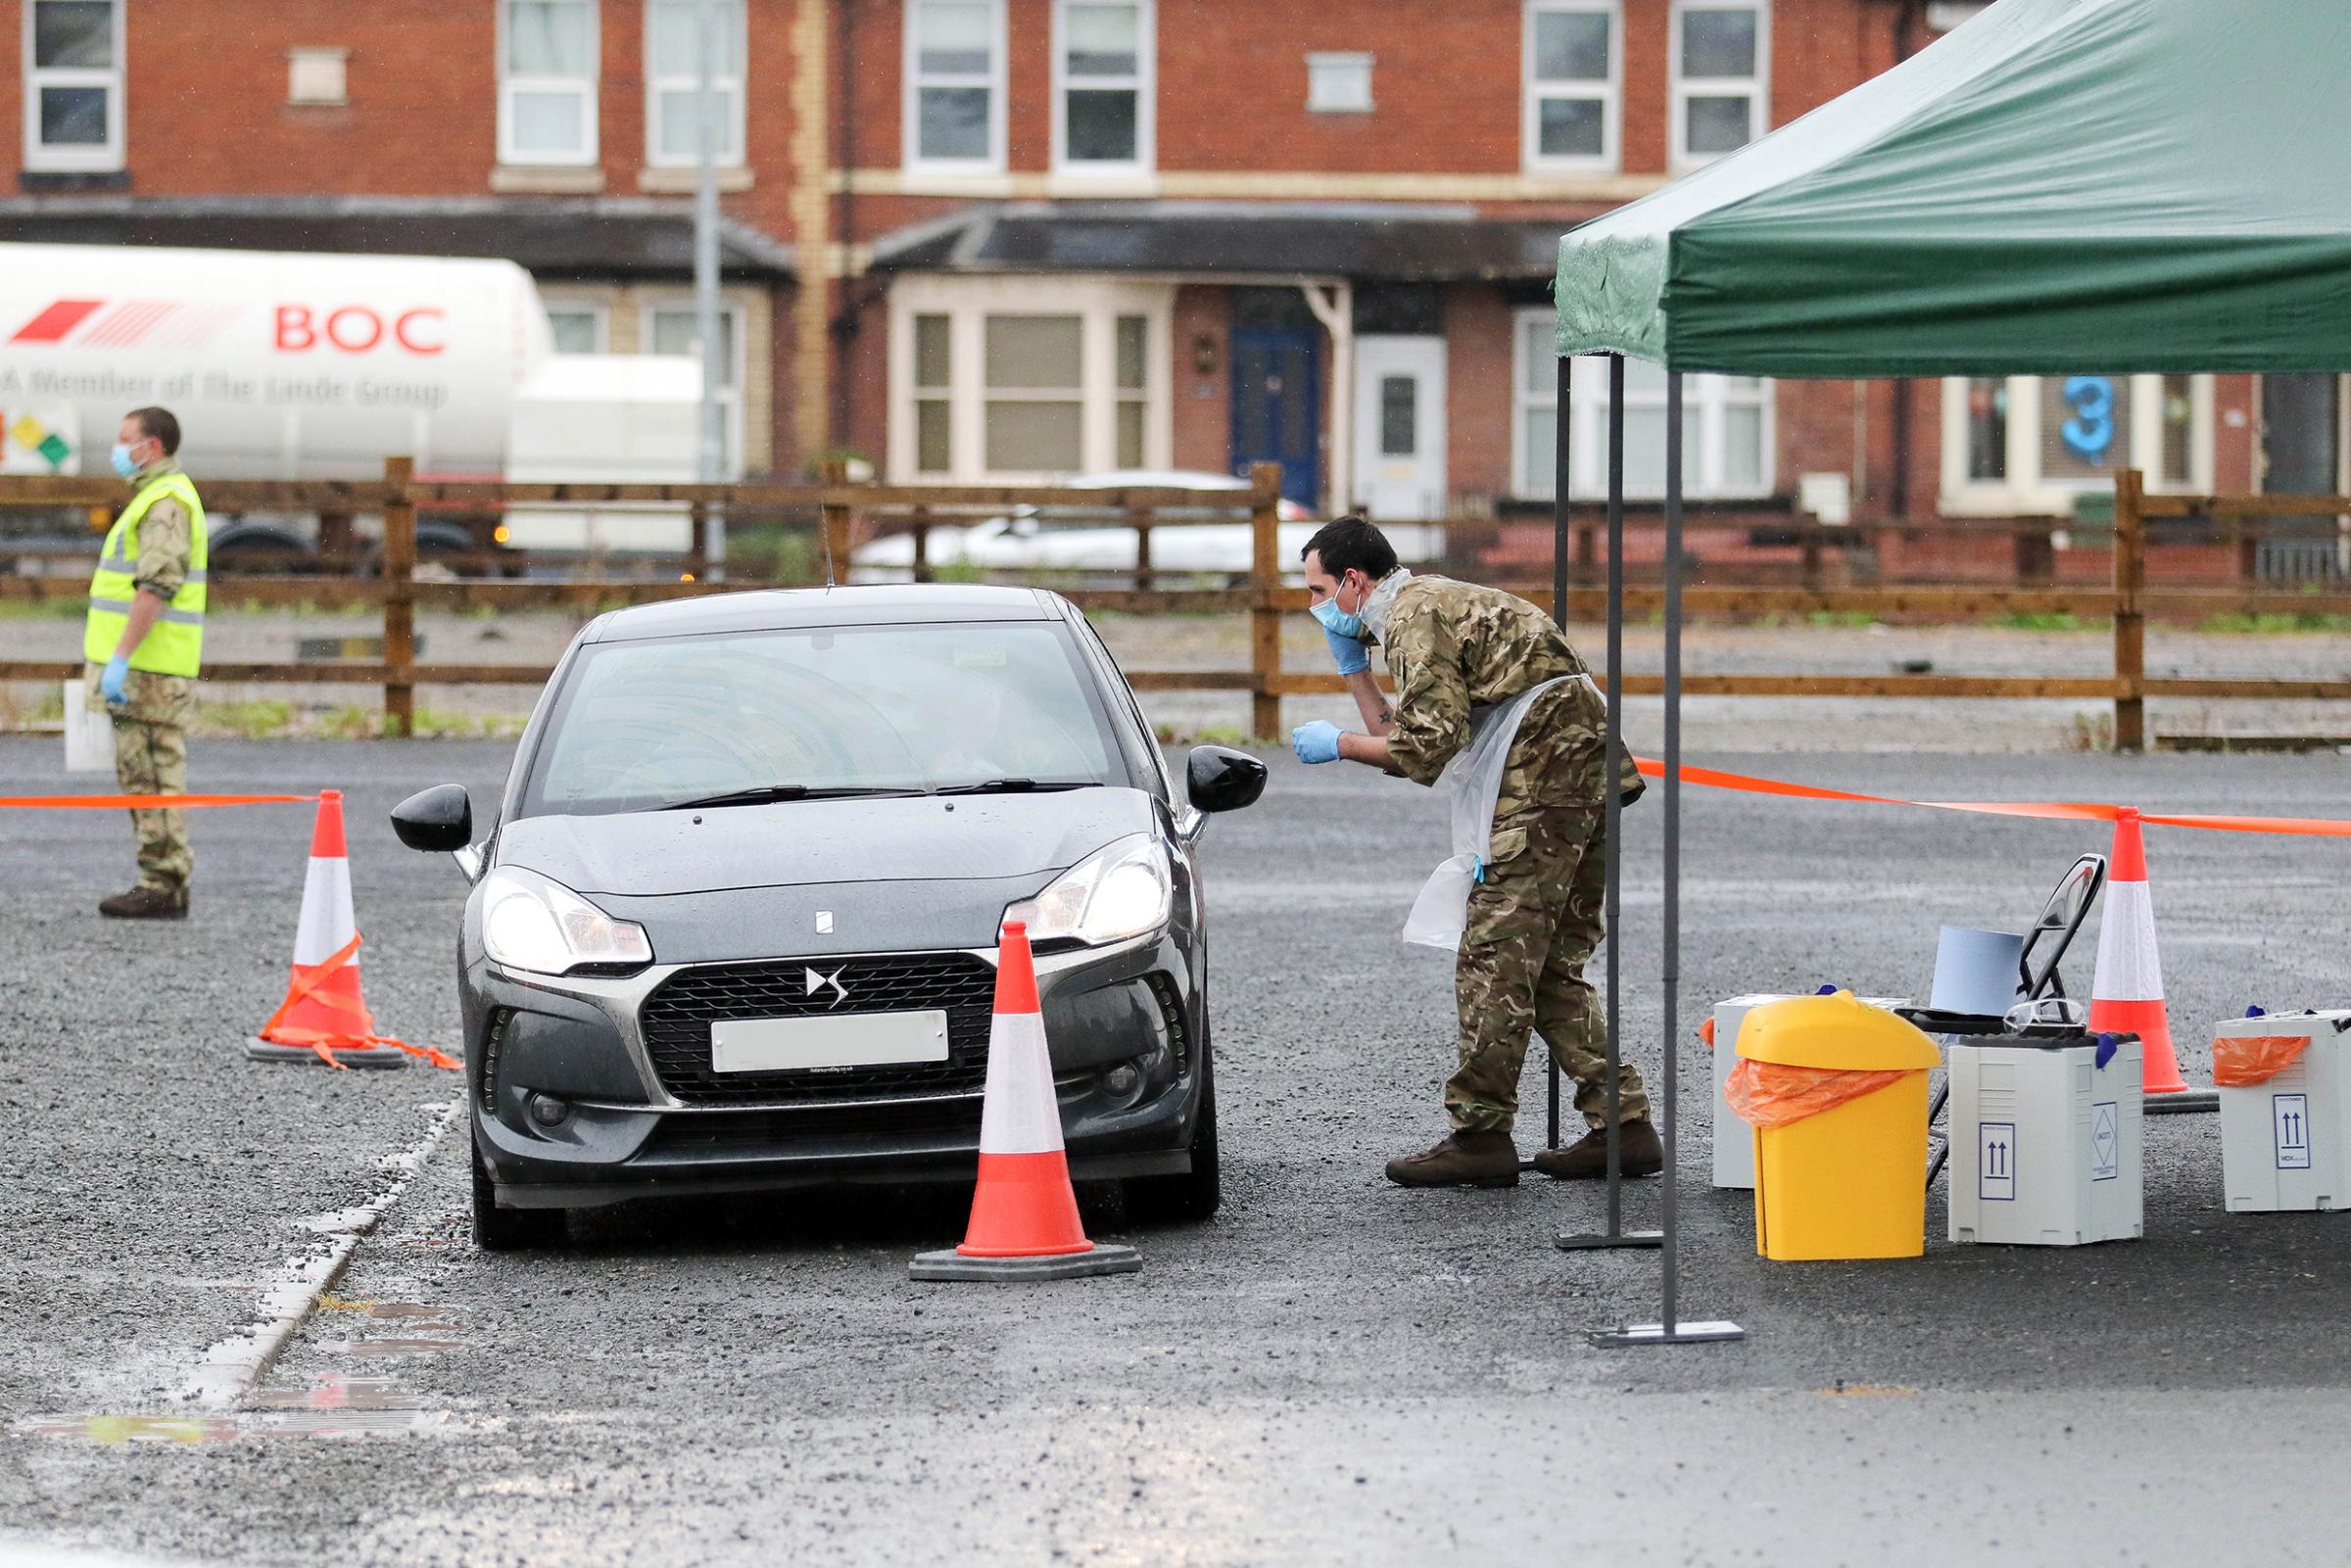 The coronavirus drive-through testing area which was at Merton Meadow car park in Hereford